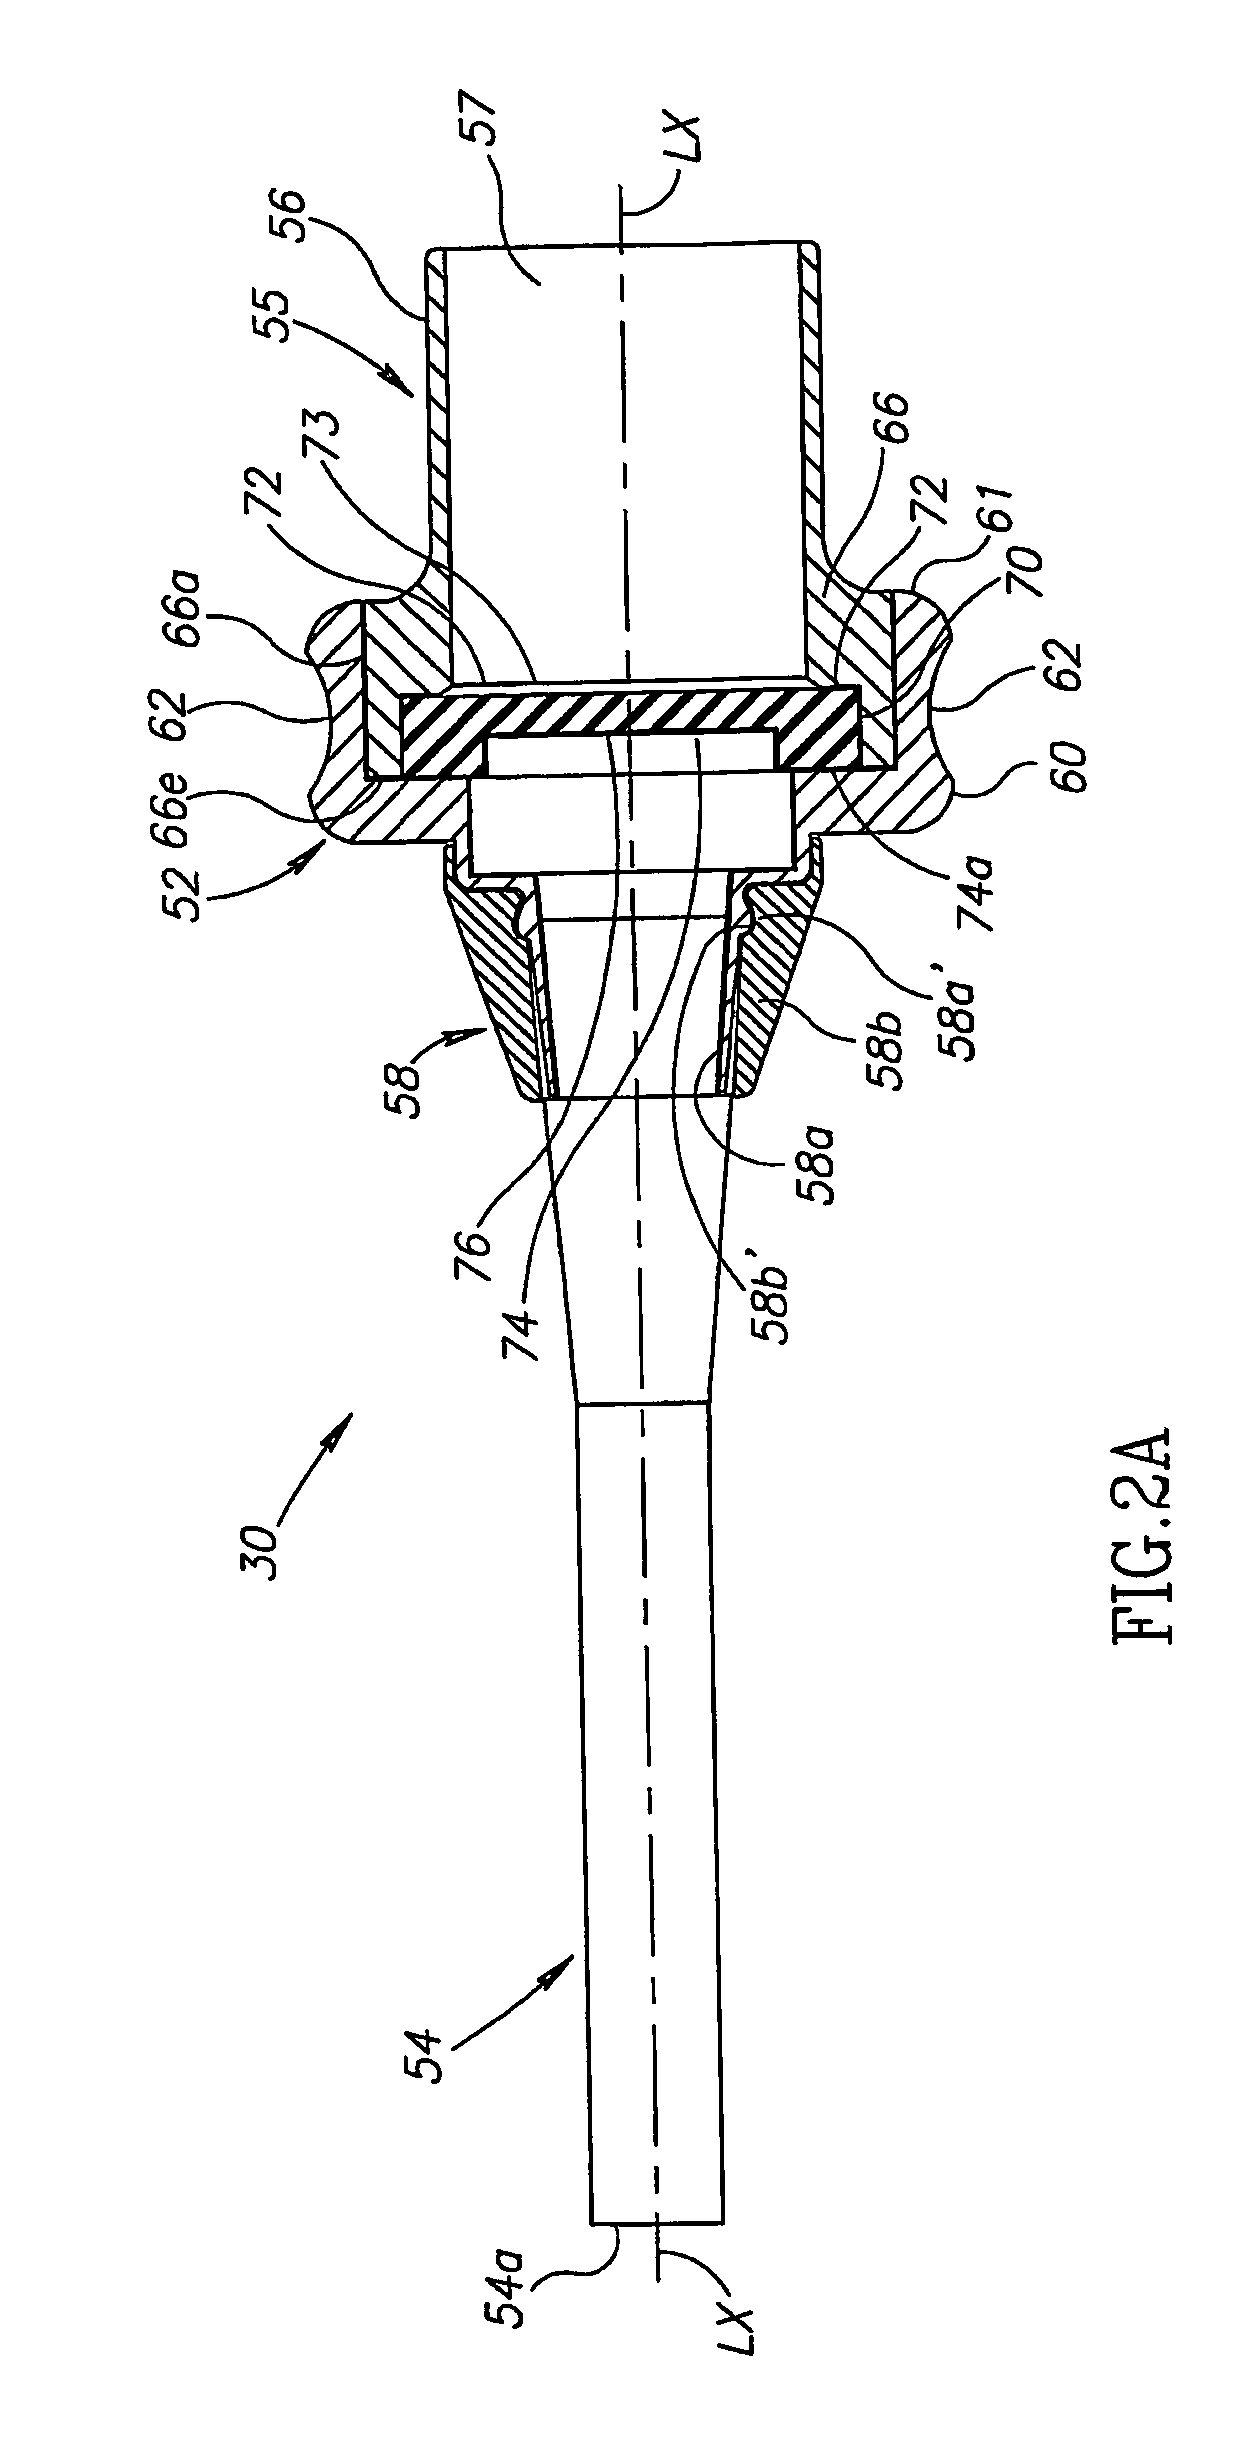 Insertion and retrieval system for inflatable devices